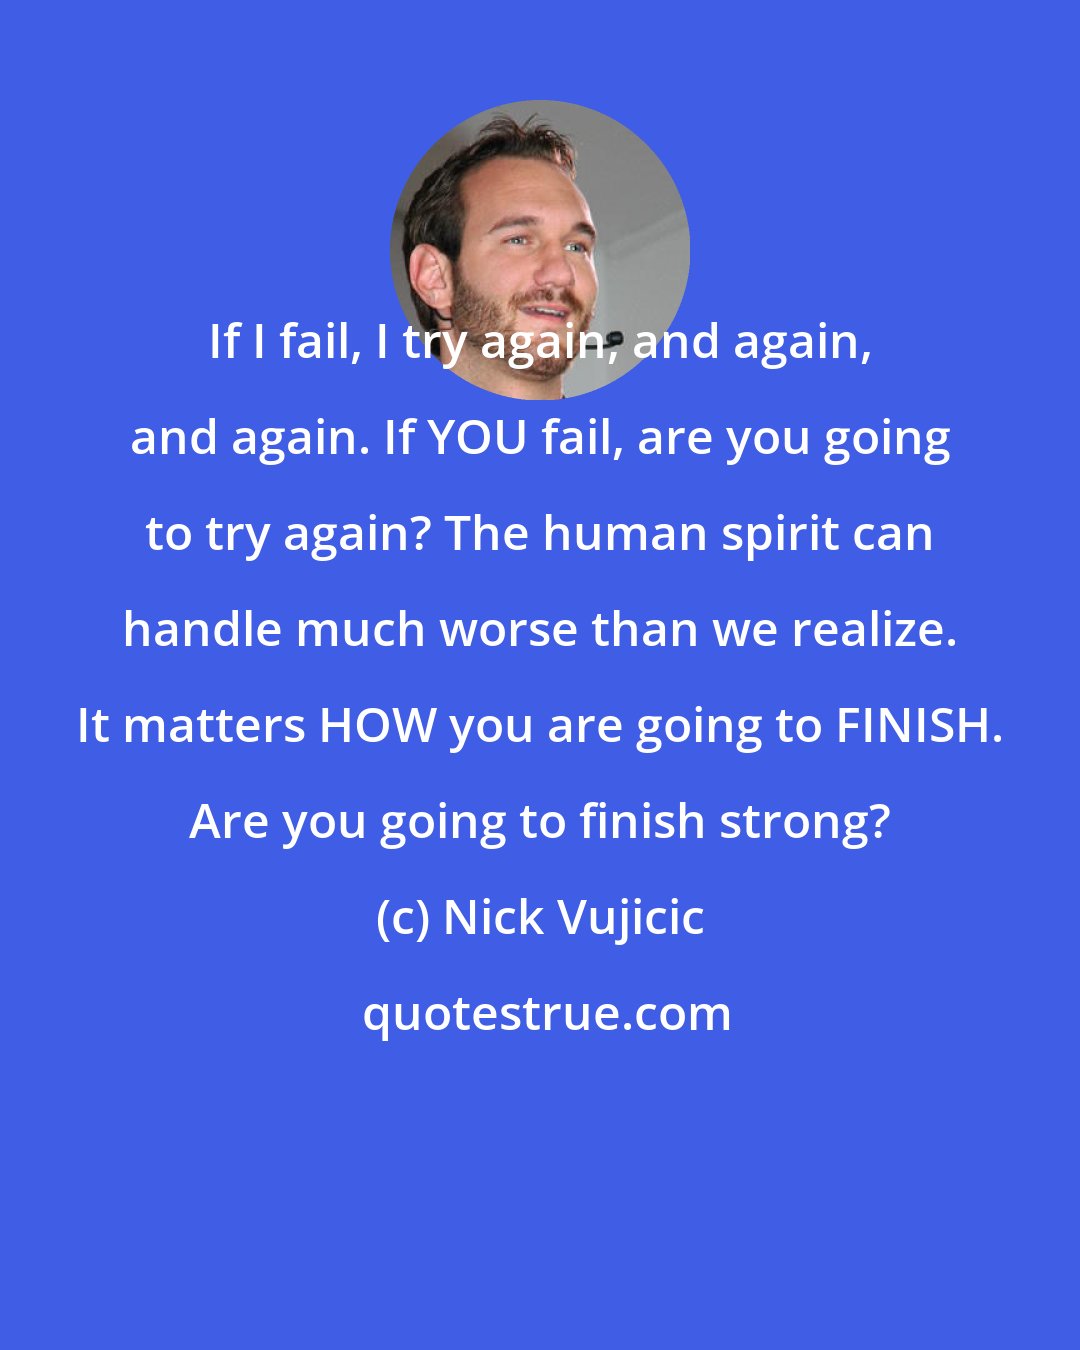 Nick Vujicic: If I fail, I try again, and again, and again. If YOU fail, are you going to try again? The human spirit can handle much worse than we realize. It matters HOW you are going to FINISH. Are you going to finish strong?